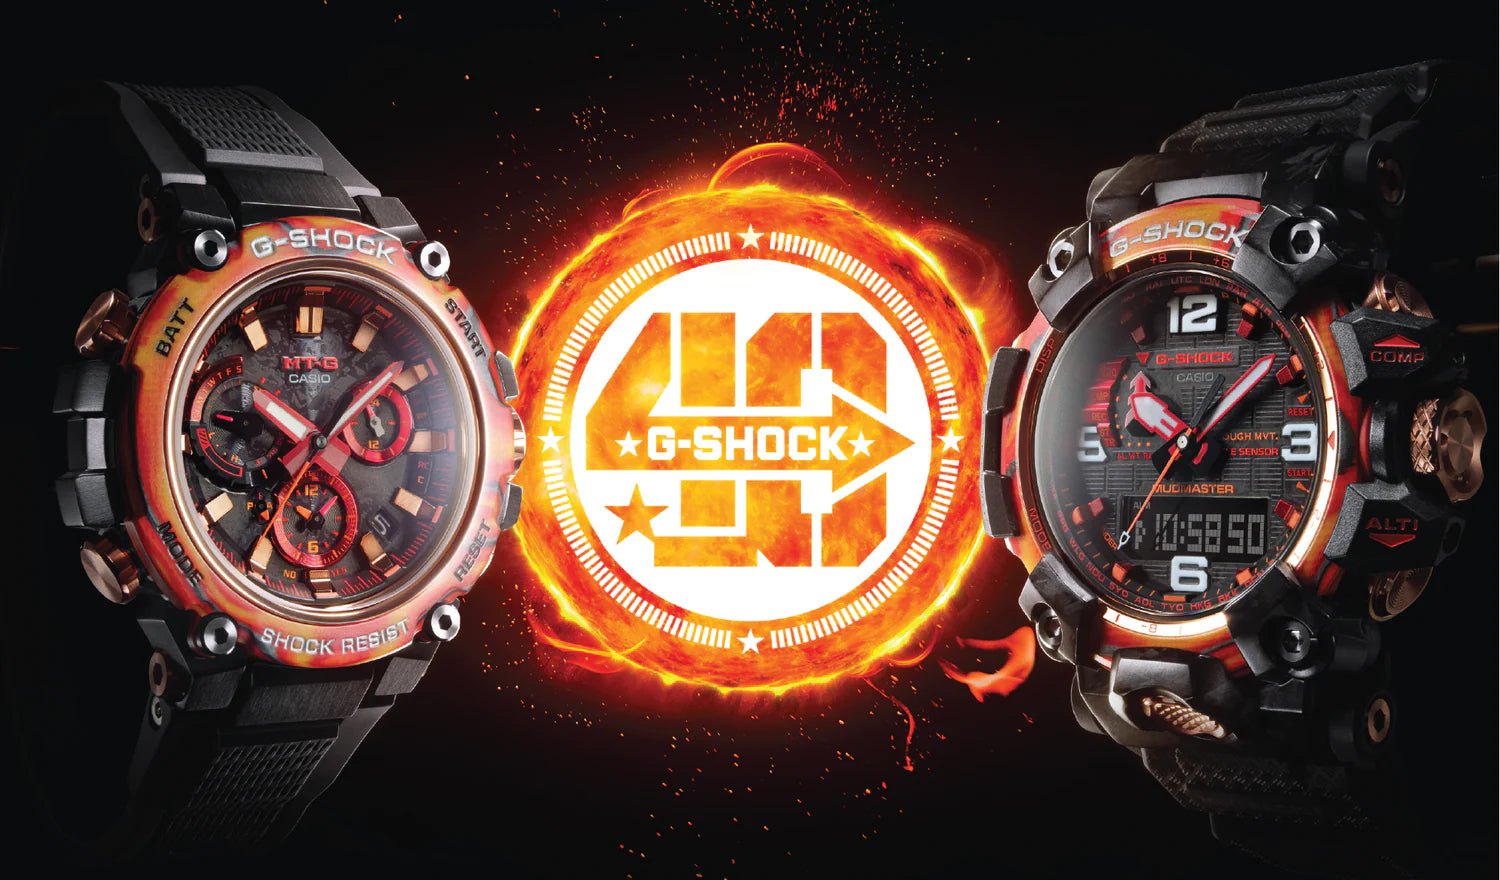 G-SHOCK to launch limited-edition collections to celebrate its 40th Anniversary - CASIO Australia